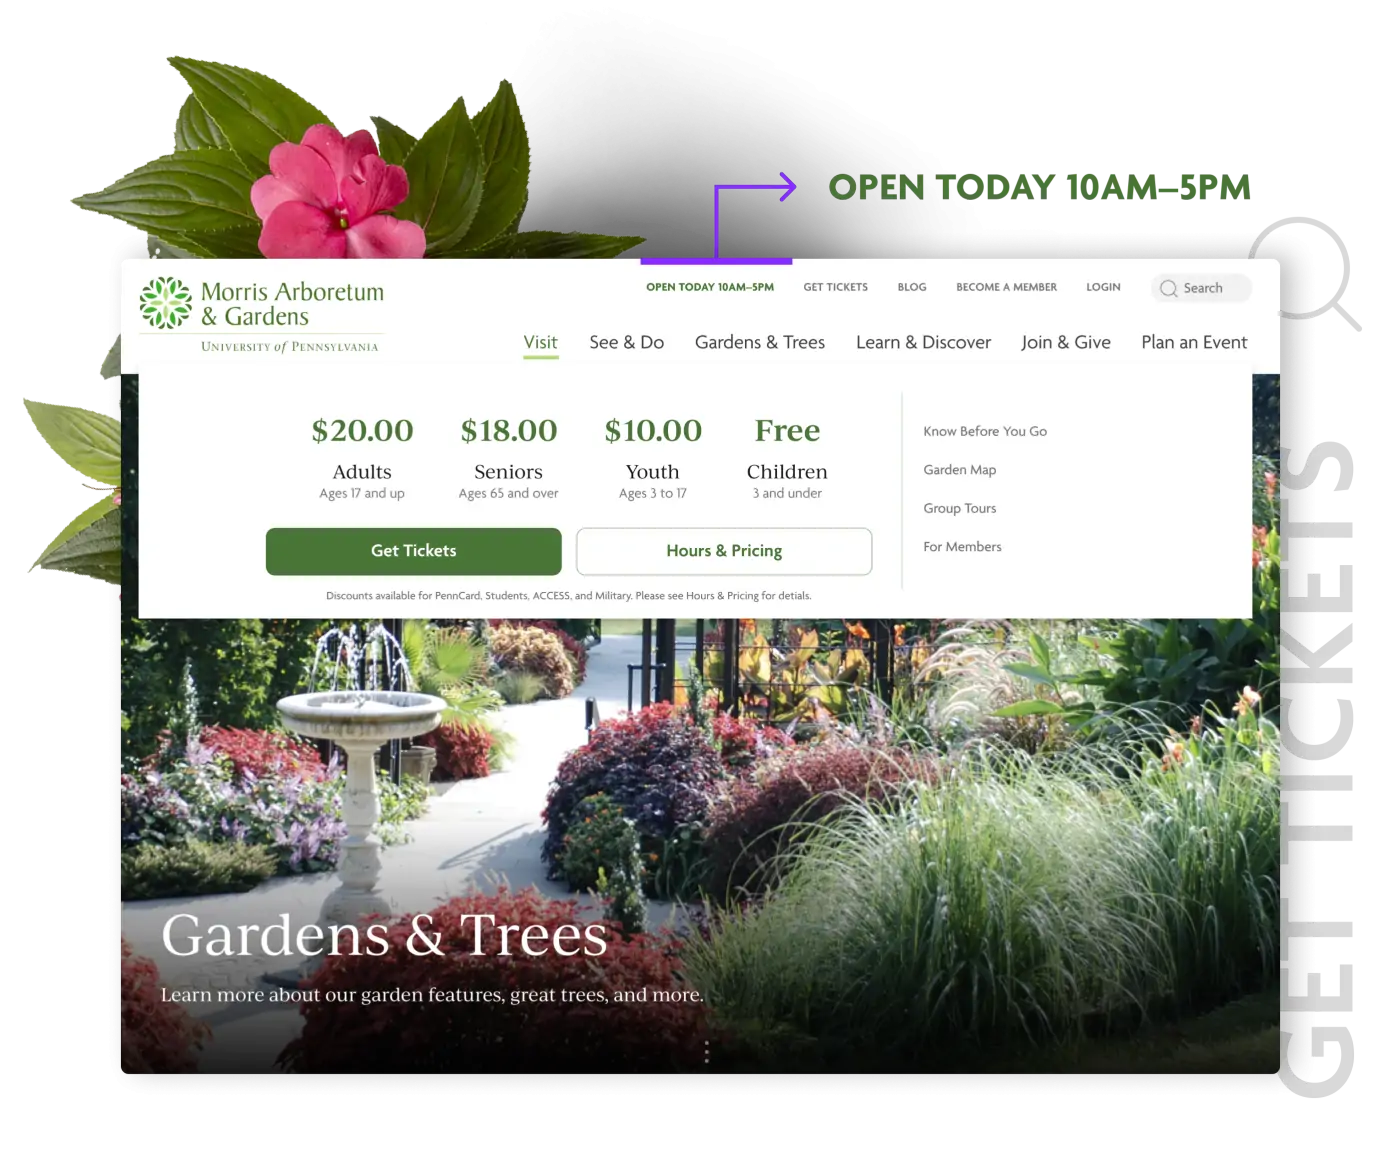 the Morris Arboretum & Gardens website's expanded mega-menu navigation calling out the open hours and get tickets and surrounded by flowers